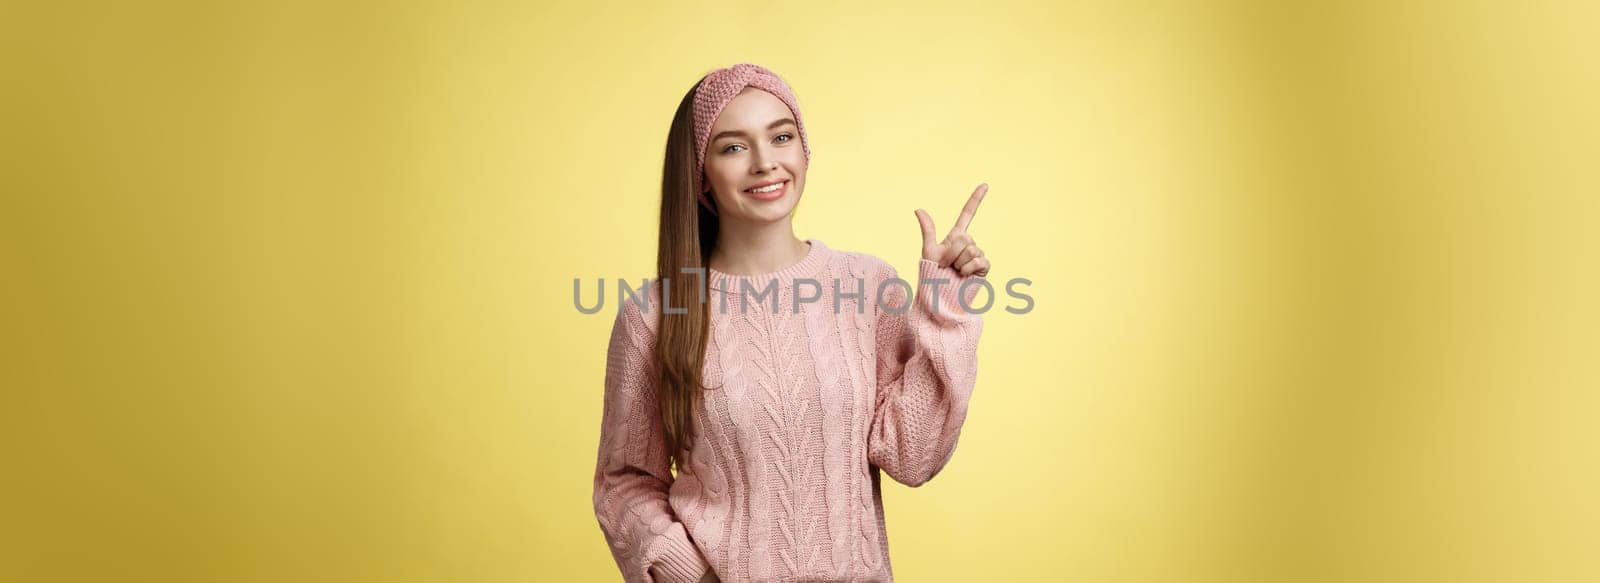 Girl picked staff, made decision pointing up at product smiling pleased. Studio shot of young student in knitted sweater, grinning indicating upper left corner enthusiastic, giving recommendation.